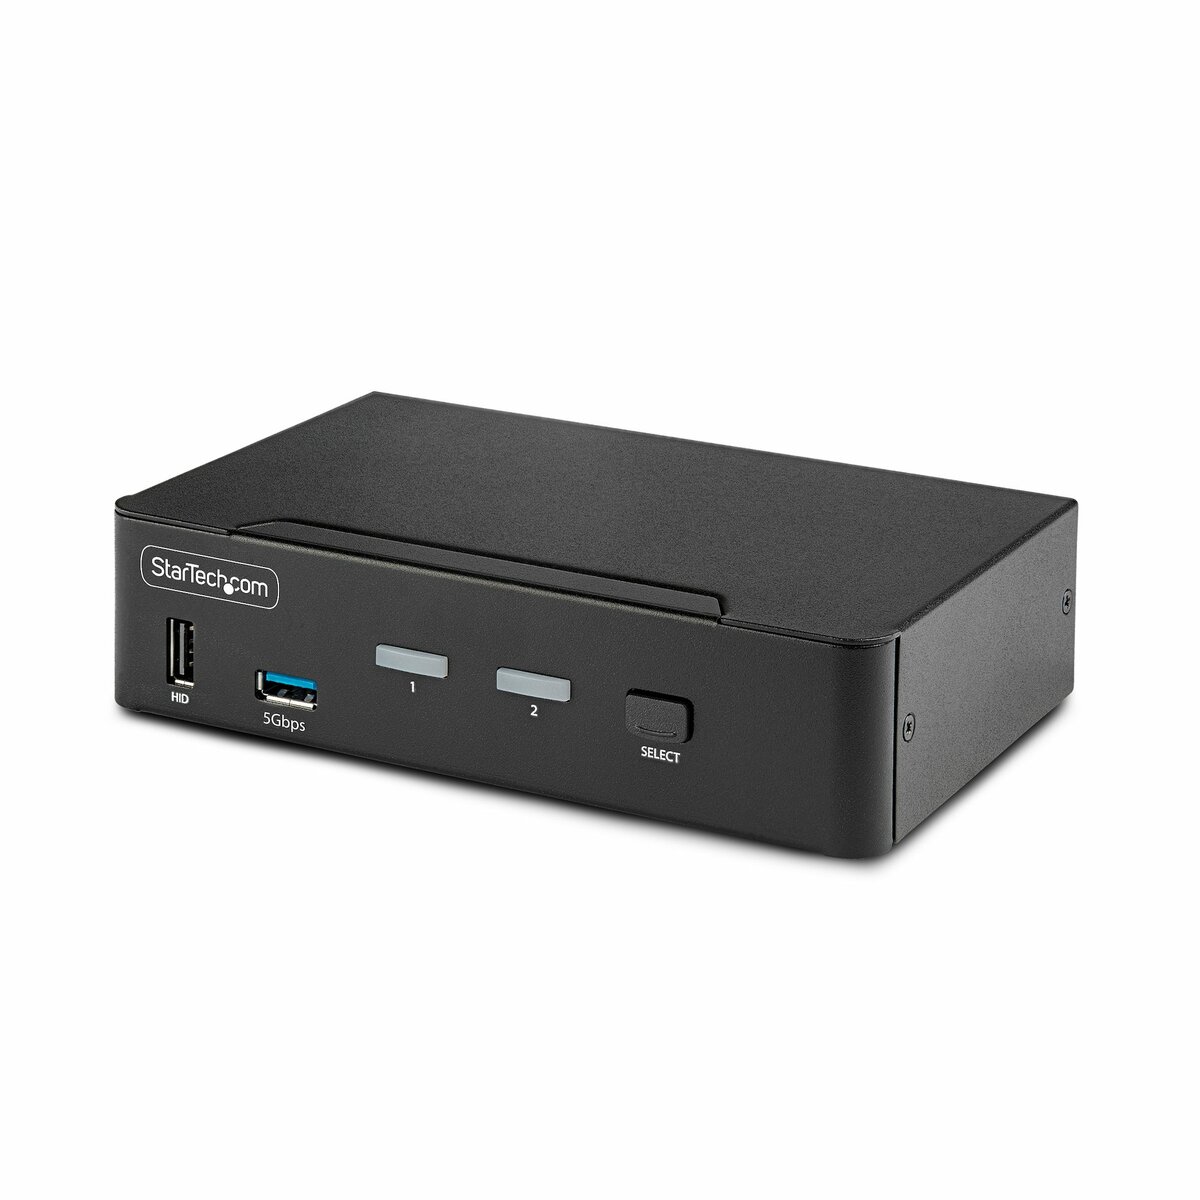 Cable Matters 4 Port USB 3.0 Switch Hub/KVM Switch, USB Switcher for 4  Computers and USB Peripherals - Button or Wireless Remote Control Swapping  